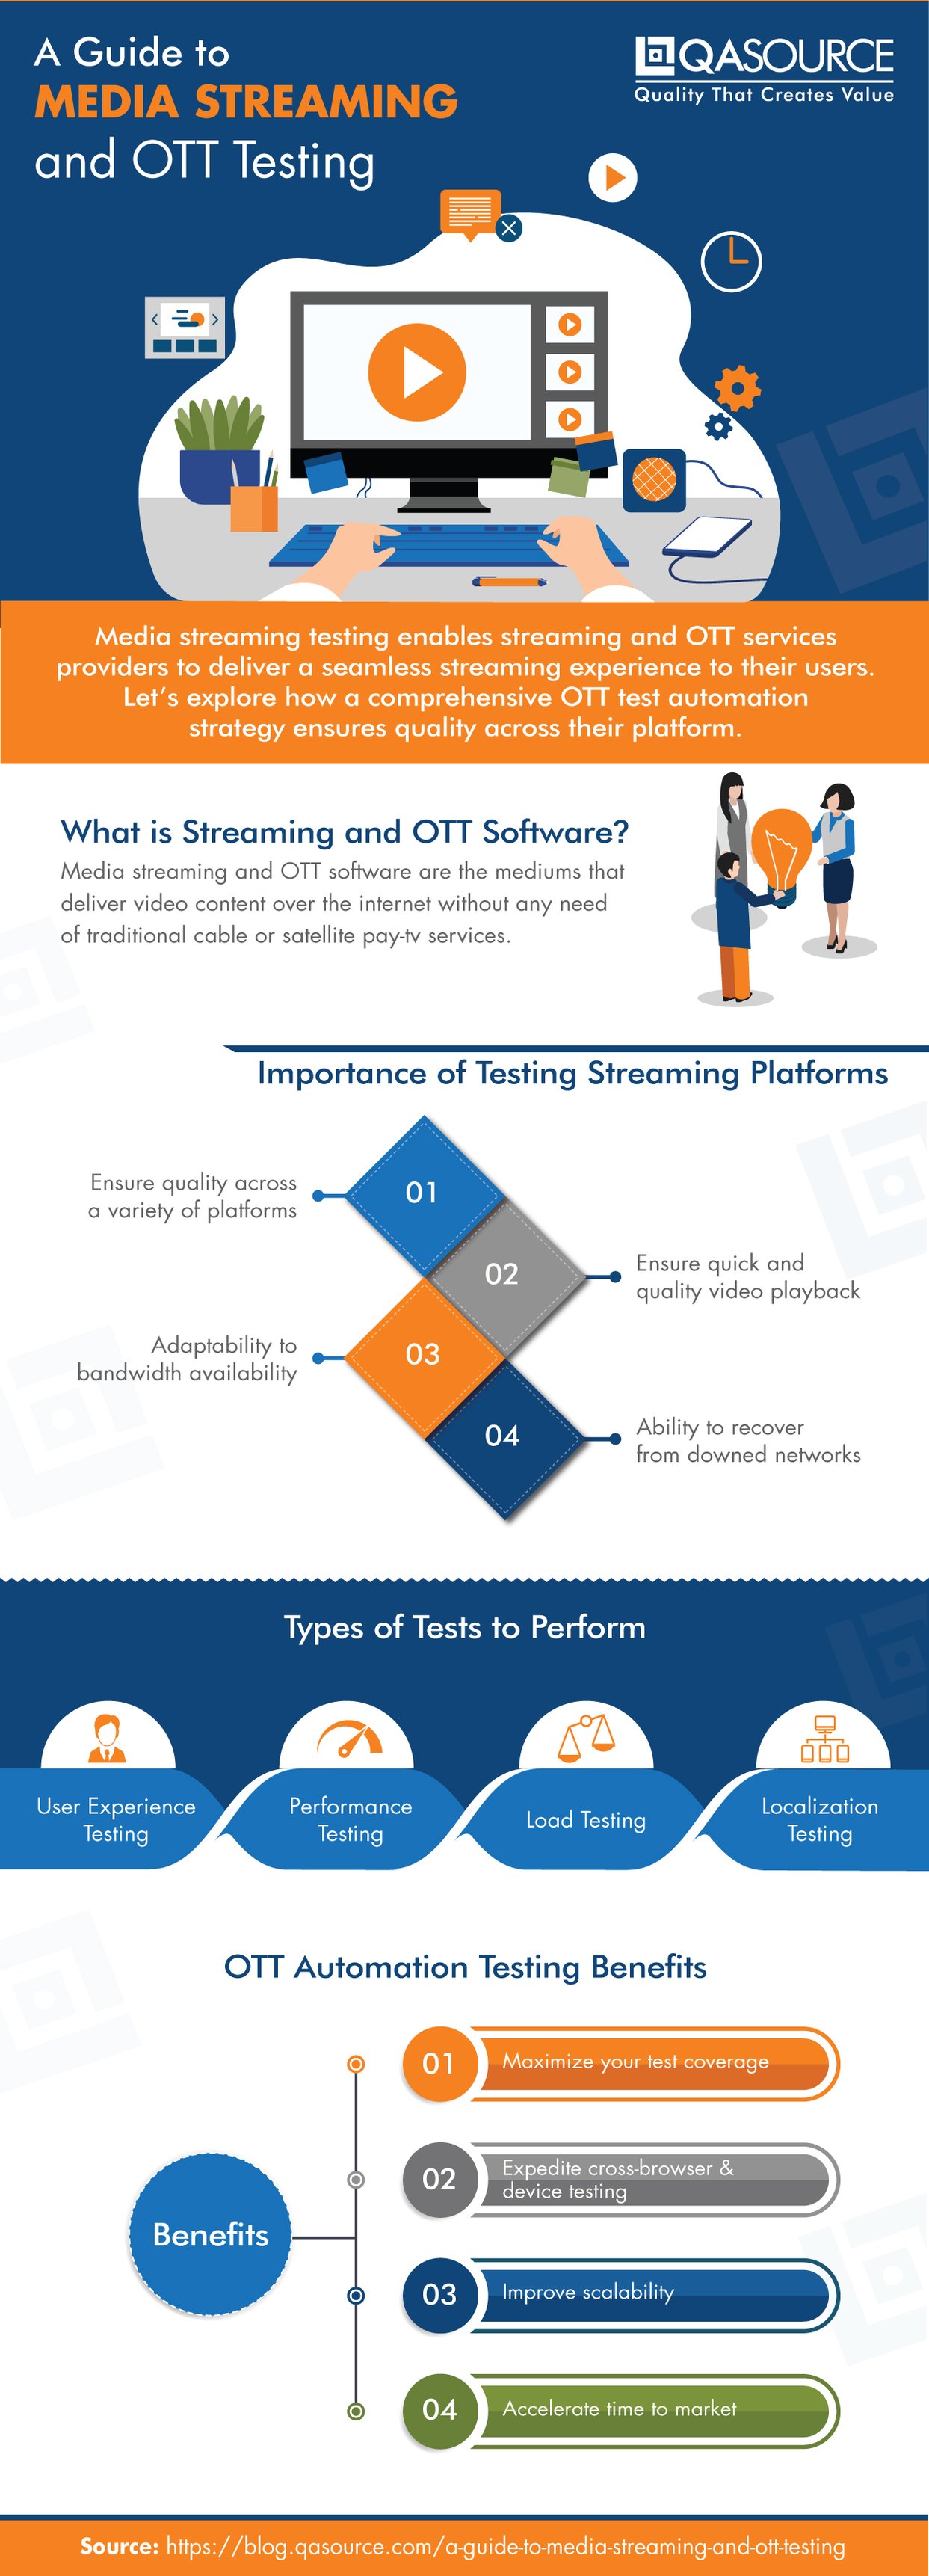 A Guide to Media Streaming and OTT Testing (Infographic)